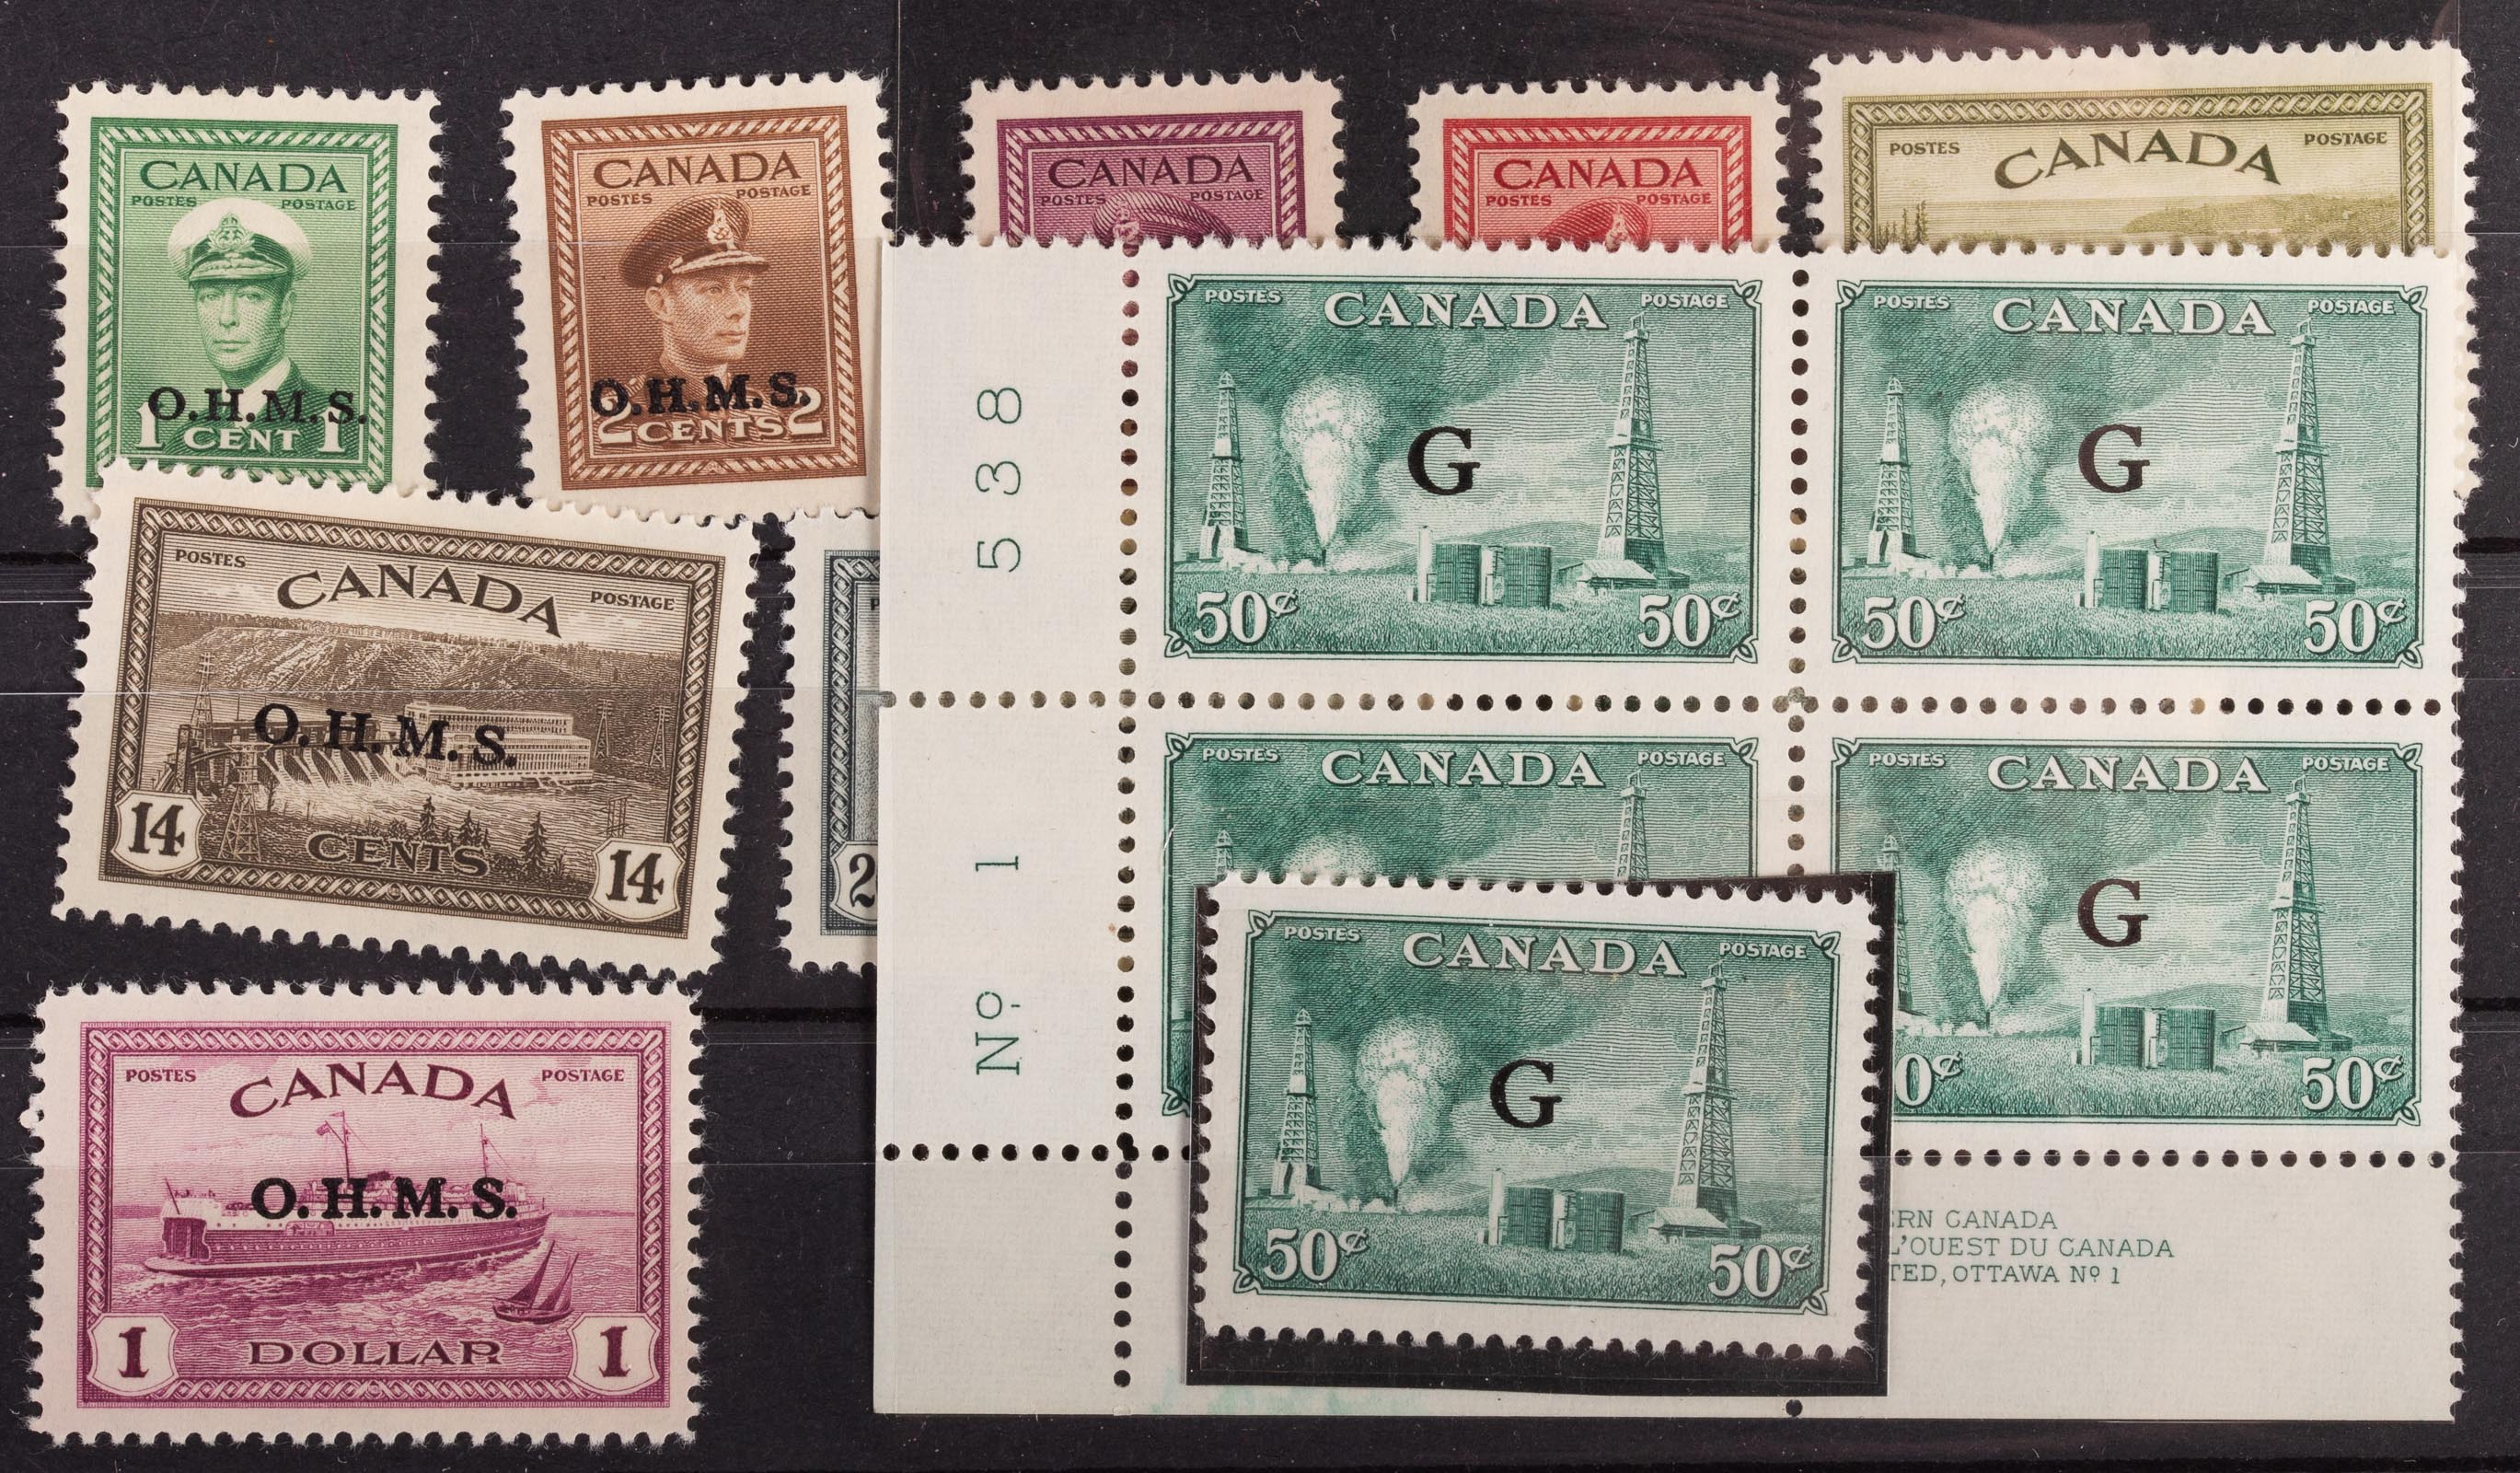 SET OF CANADA OFFICIAL STAMPS  338a11